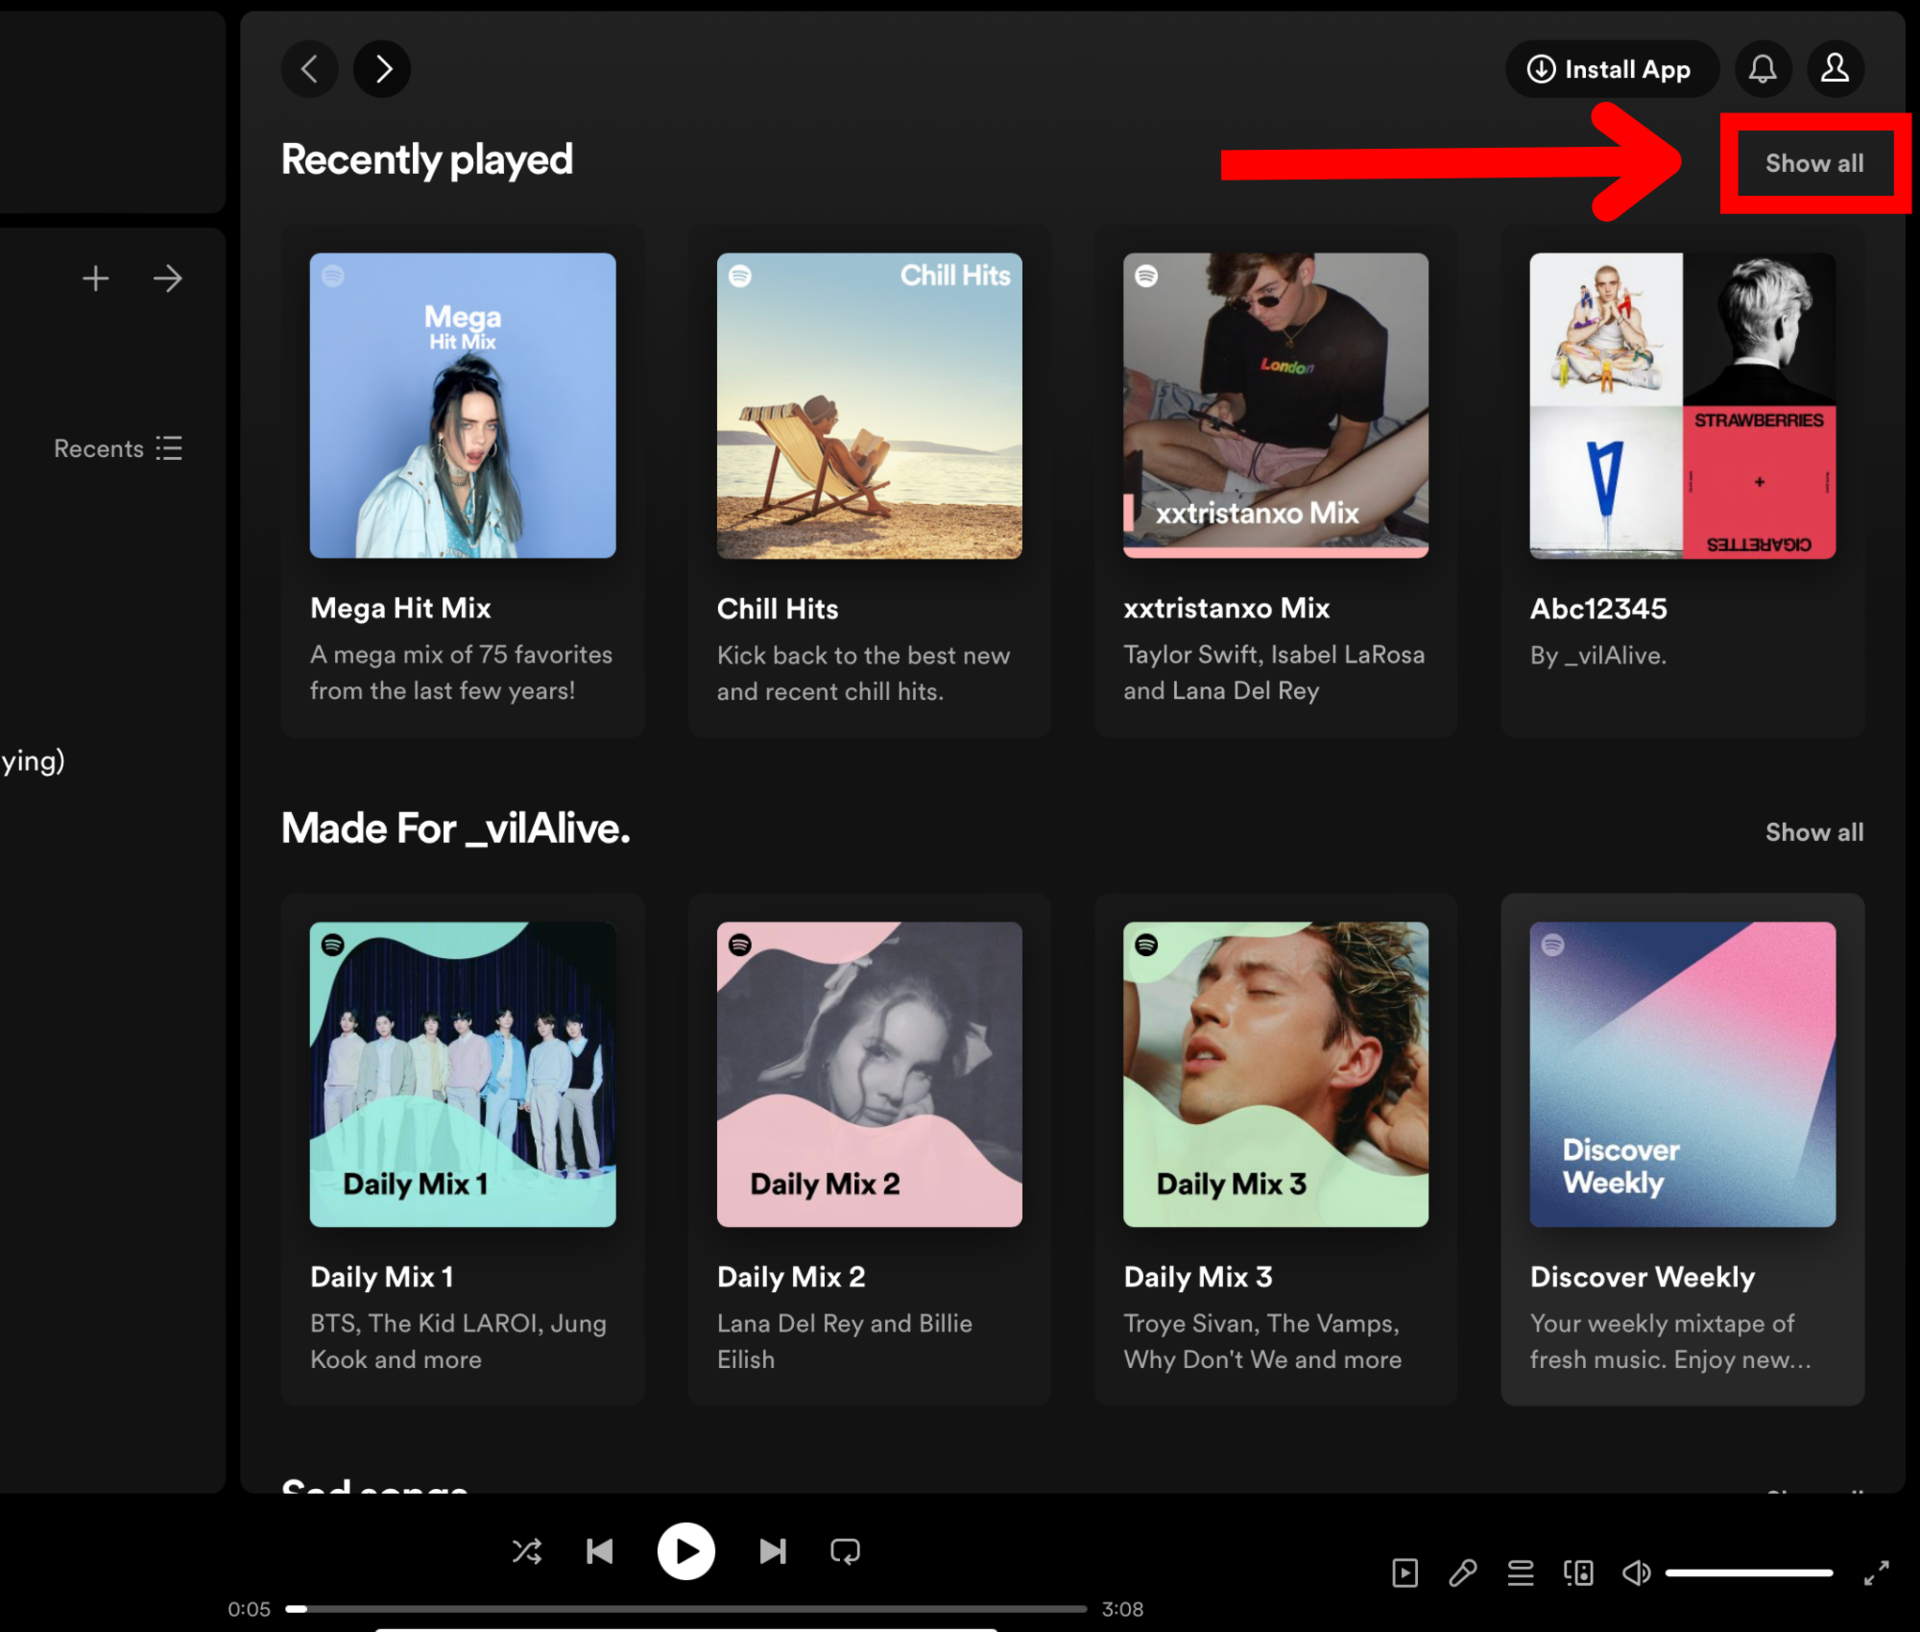 Spotify web player recently played